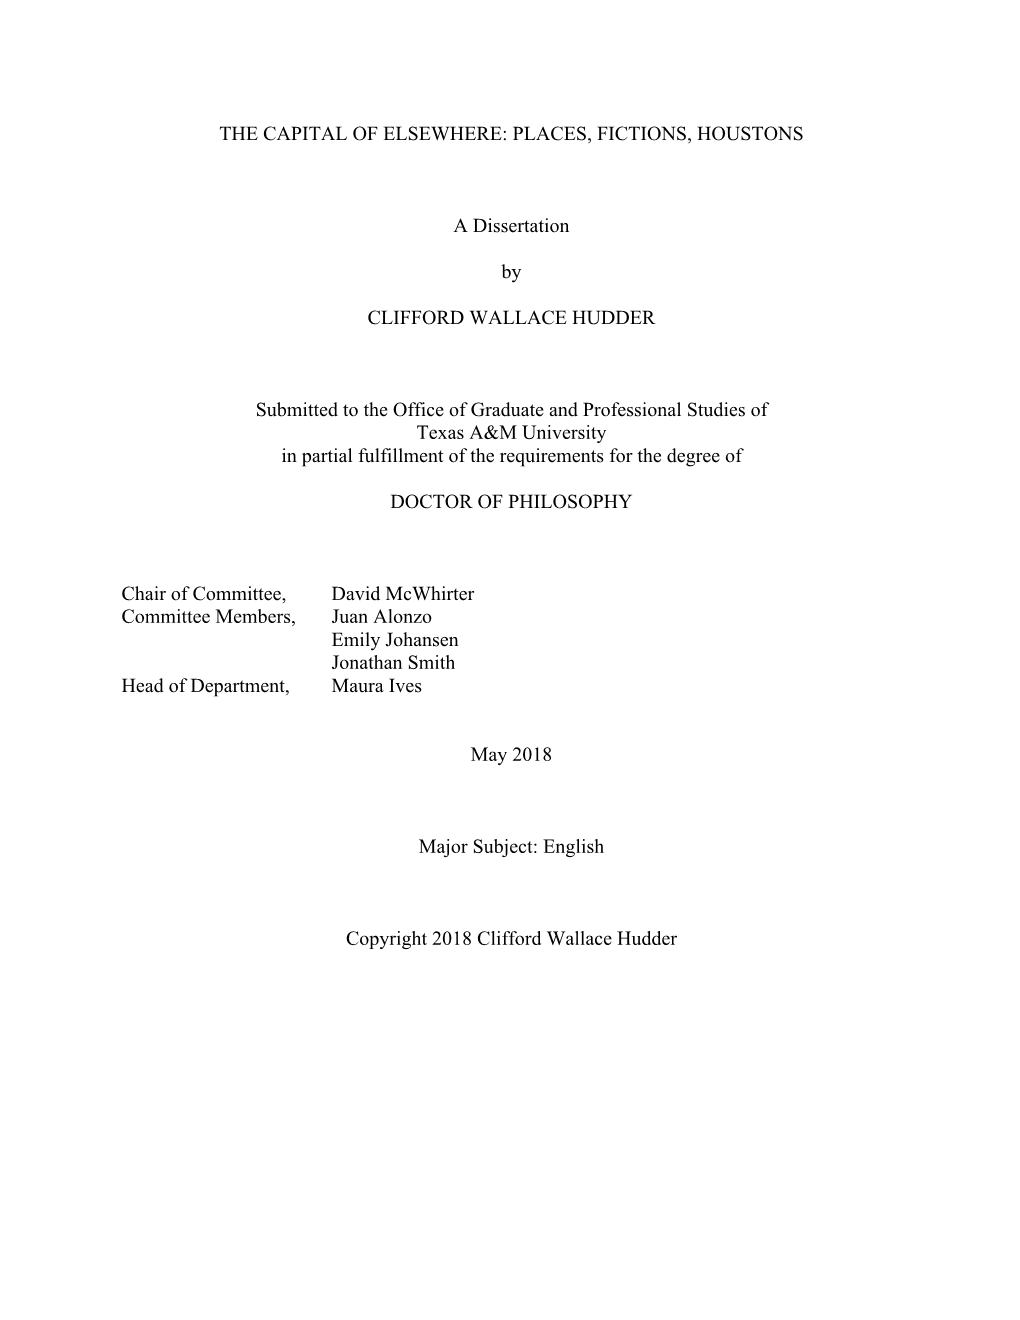 THE CAPITAL of ELSEWHERE: PLACES, FICTIONS, HOUSTONS a Dissertation by CLIFFORD WALLACE HUDDER Submitted to the Office of Gradua